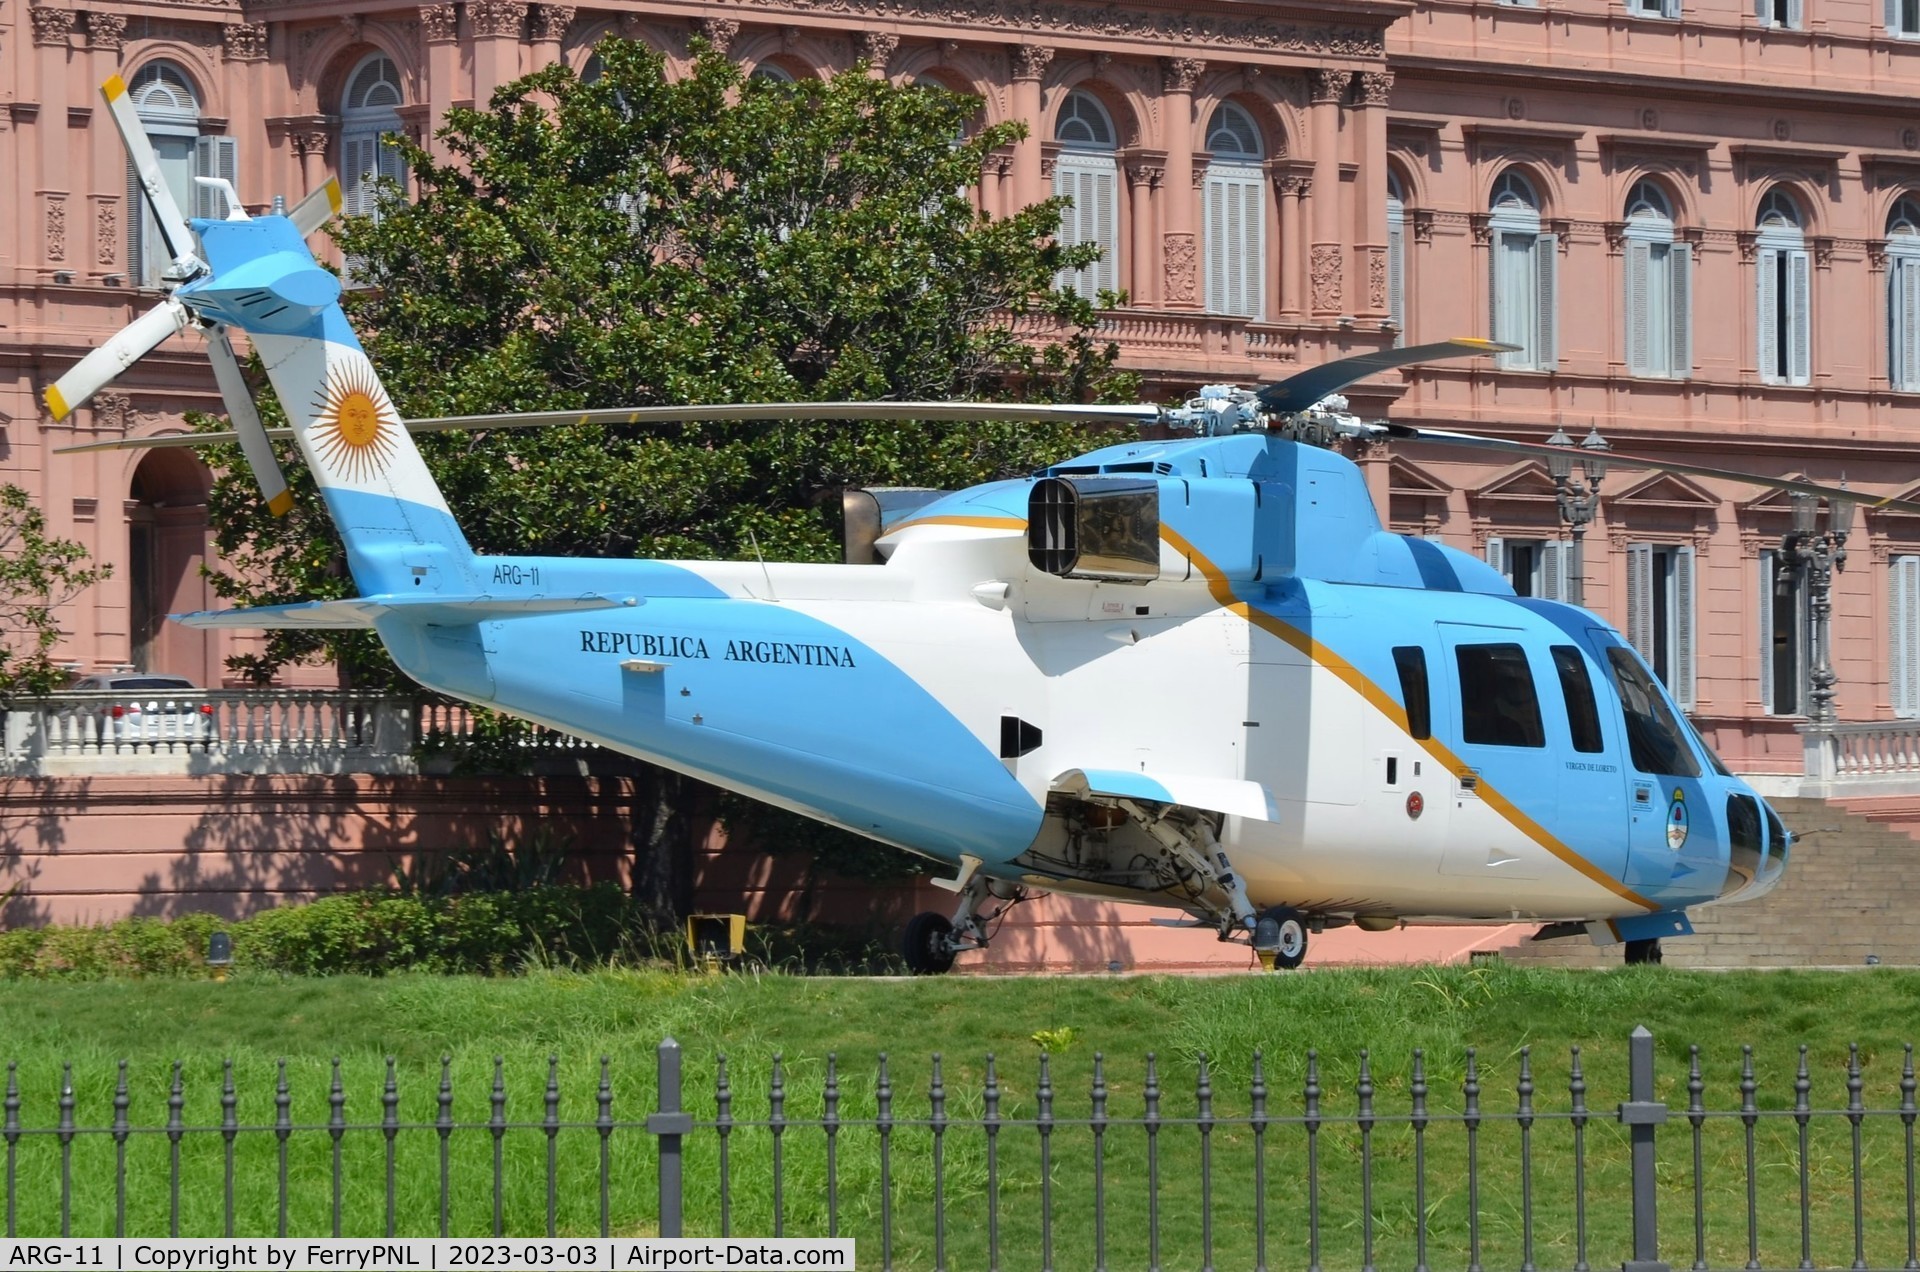 ARG-11, Sikorsky S-76 C/N 760337, S76 at Helipuerto  in front of Casa Rosada, downtown Buenos Aires